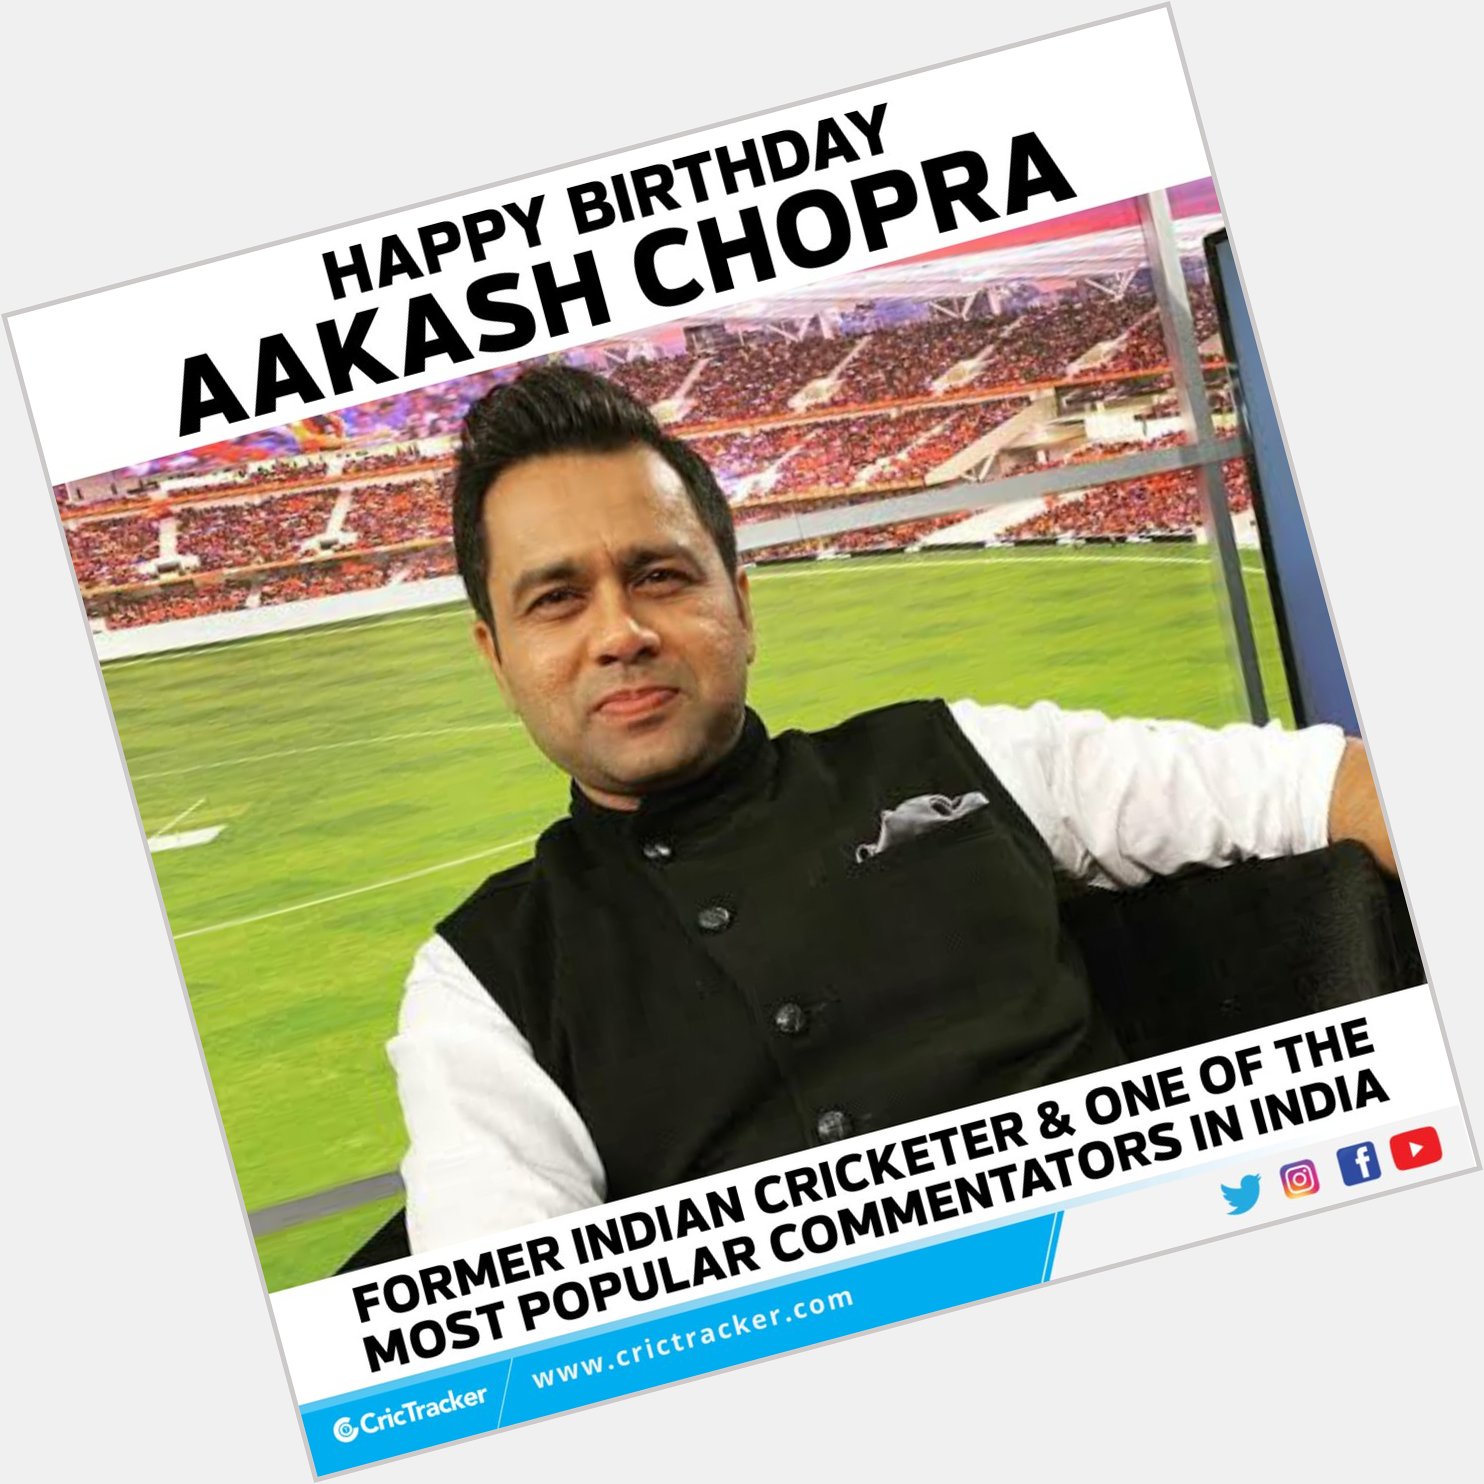 Join us in wishing Happy Birthday to former Indian cricketer Aakash Chopra.   